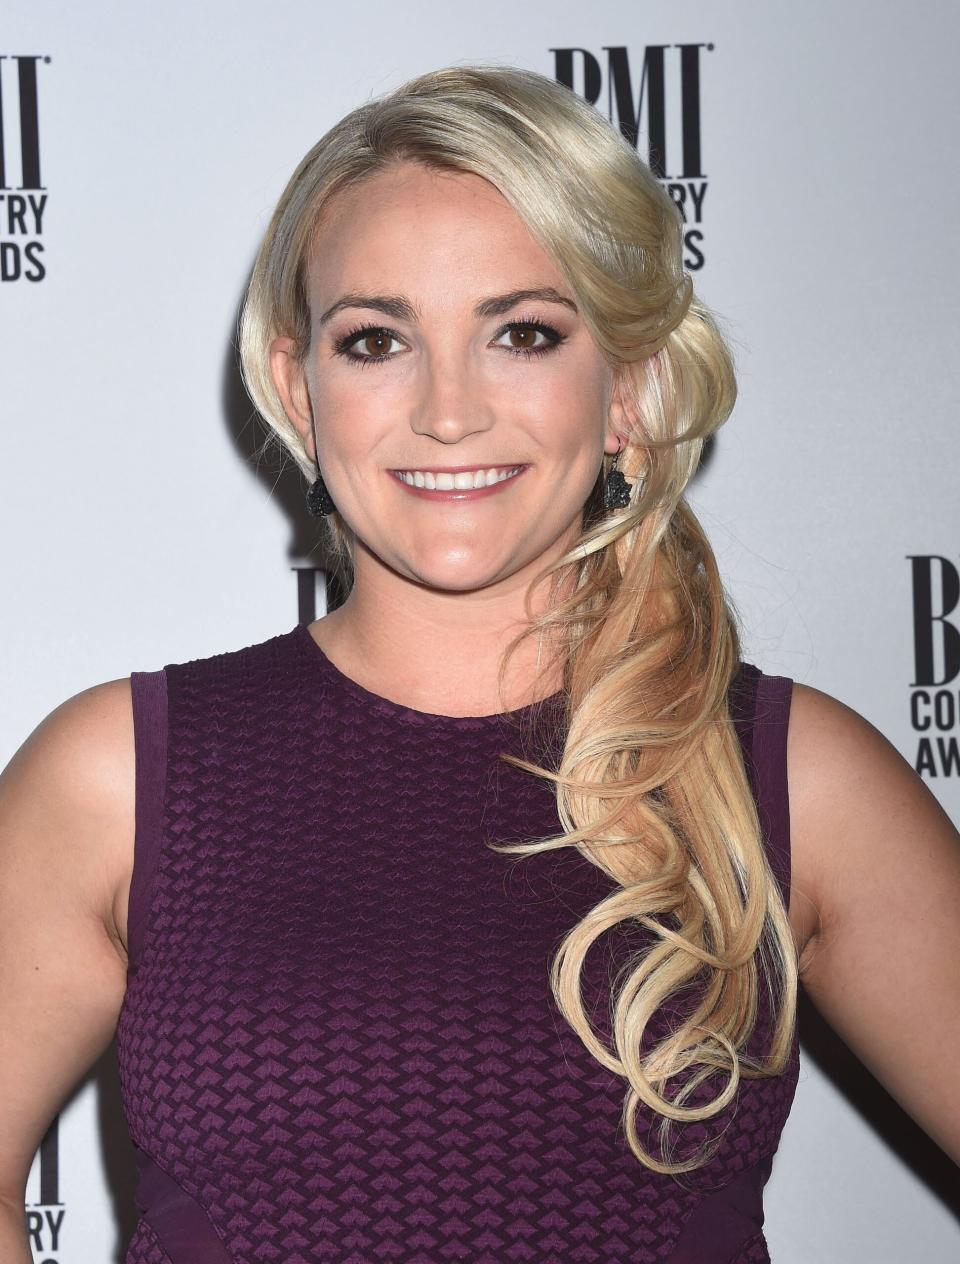 Jamie Lynn Spears at the BMI's 64th Annual Country Awards